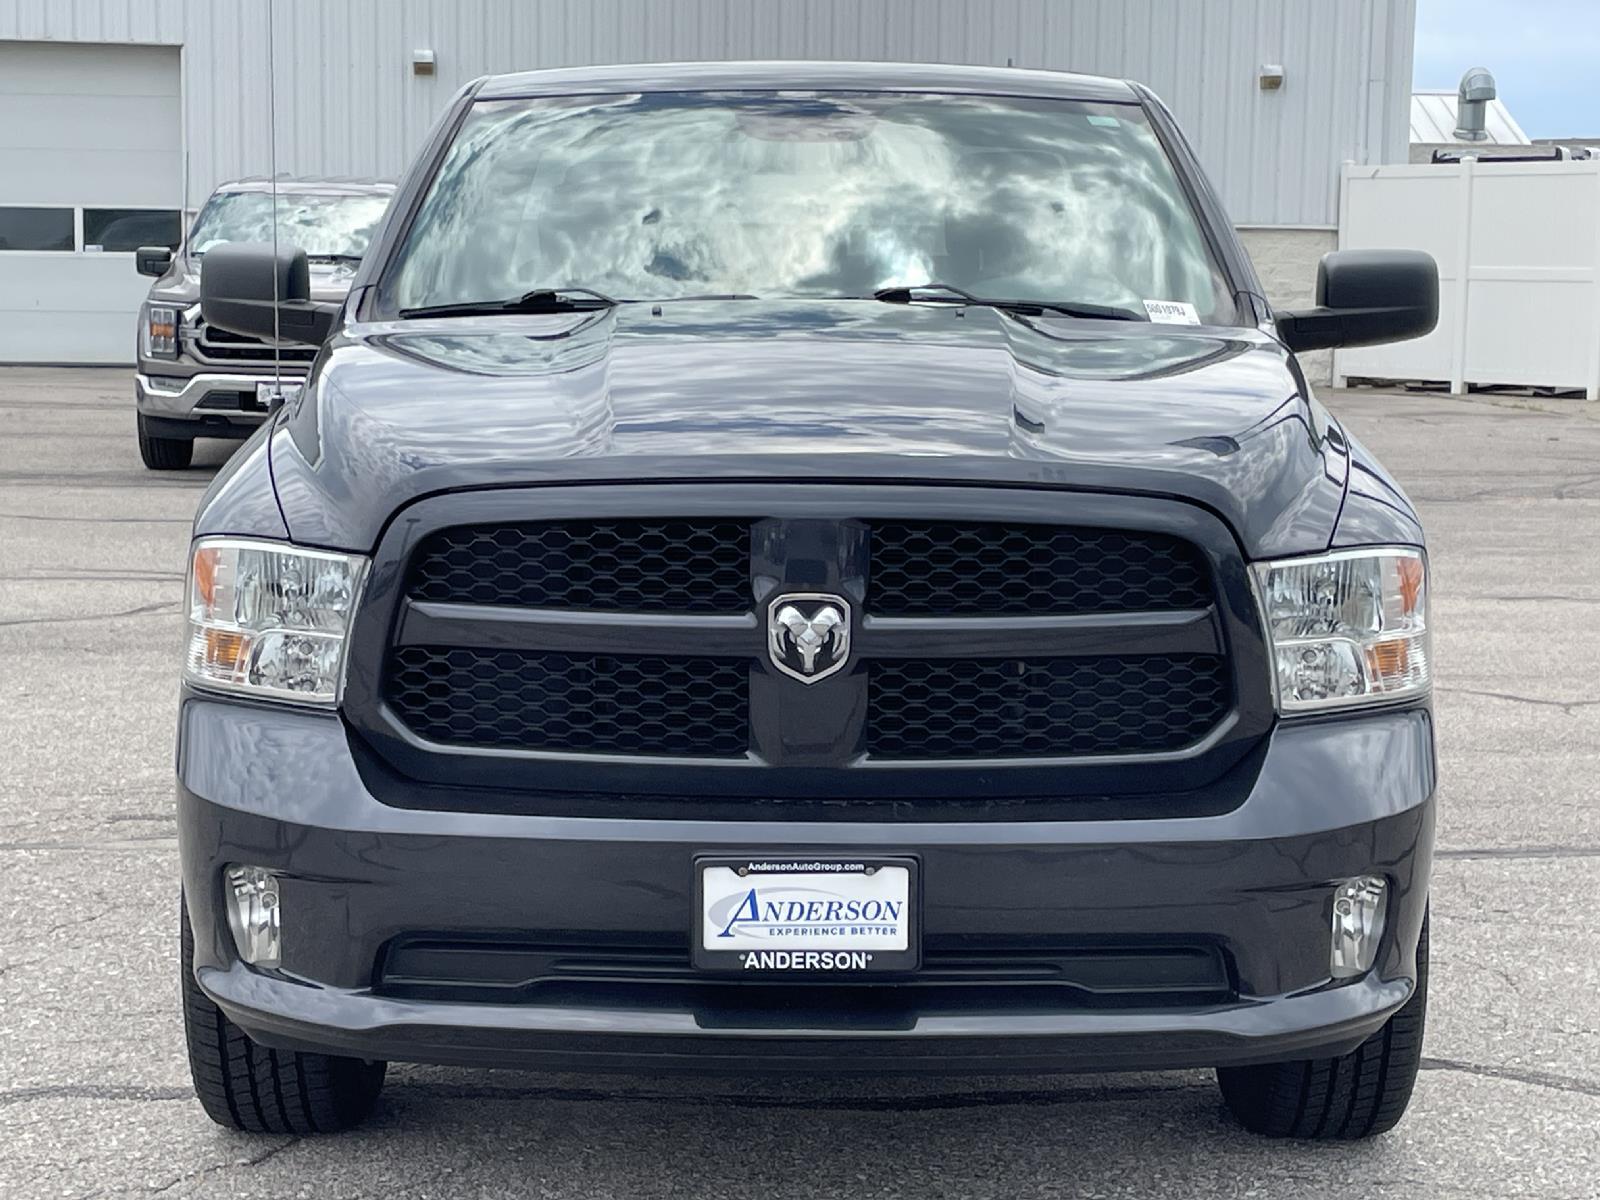 Used 2019 Ram 1500 Classic Express Crew Cab Truck for sale in Lincoln NE